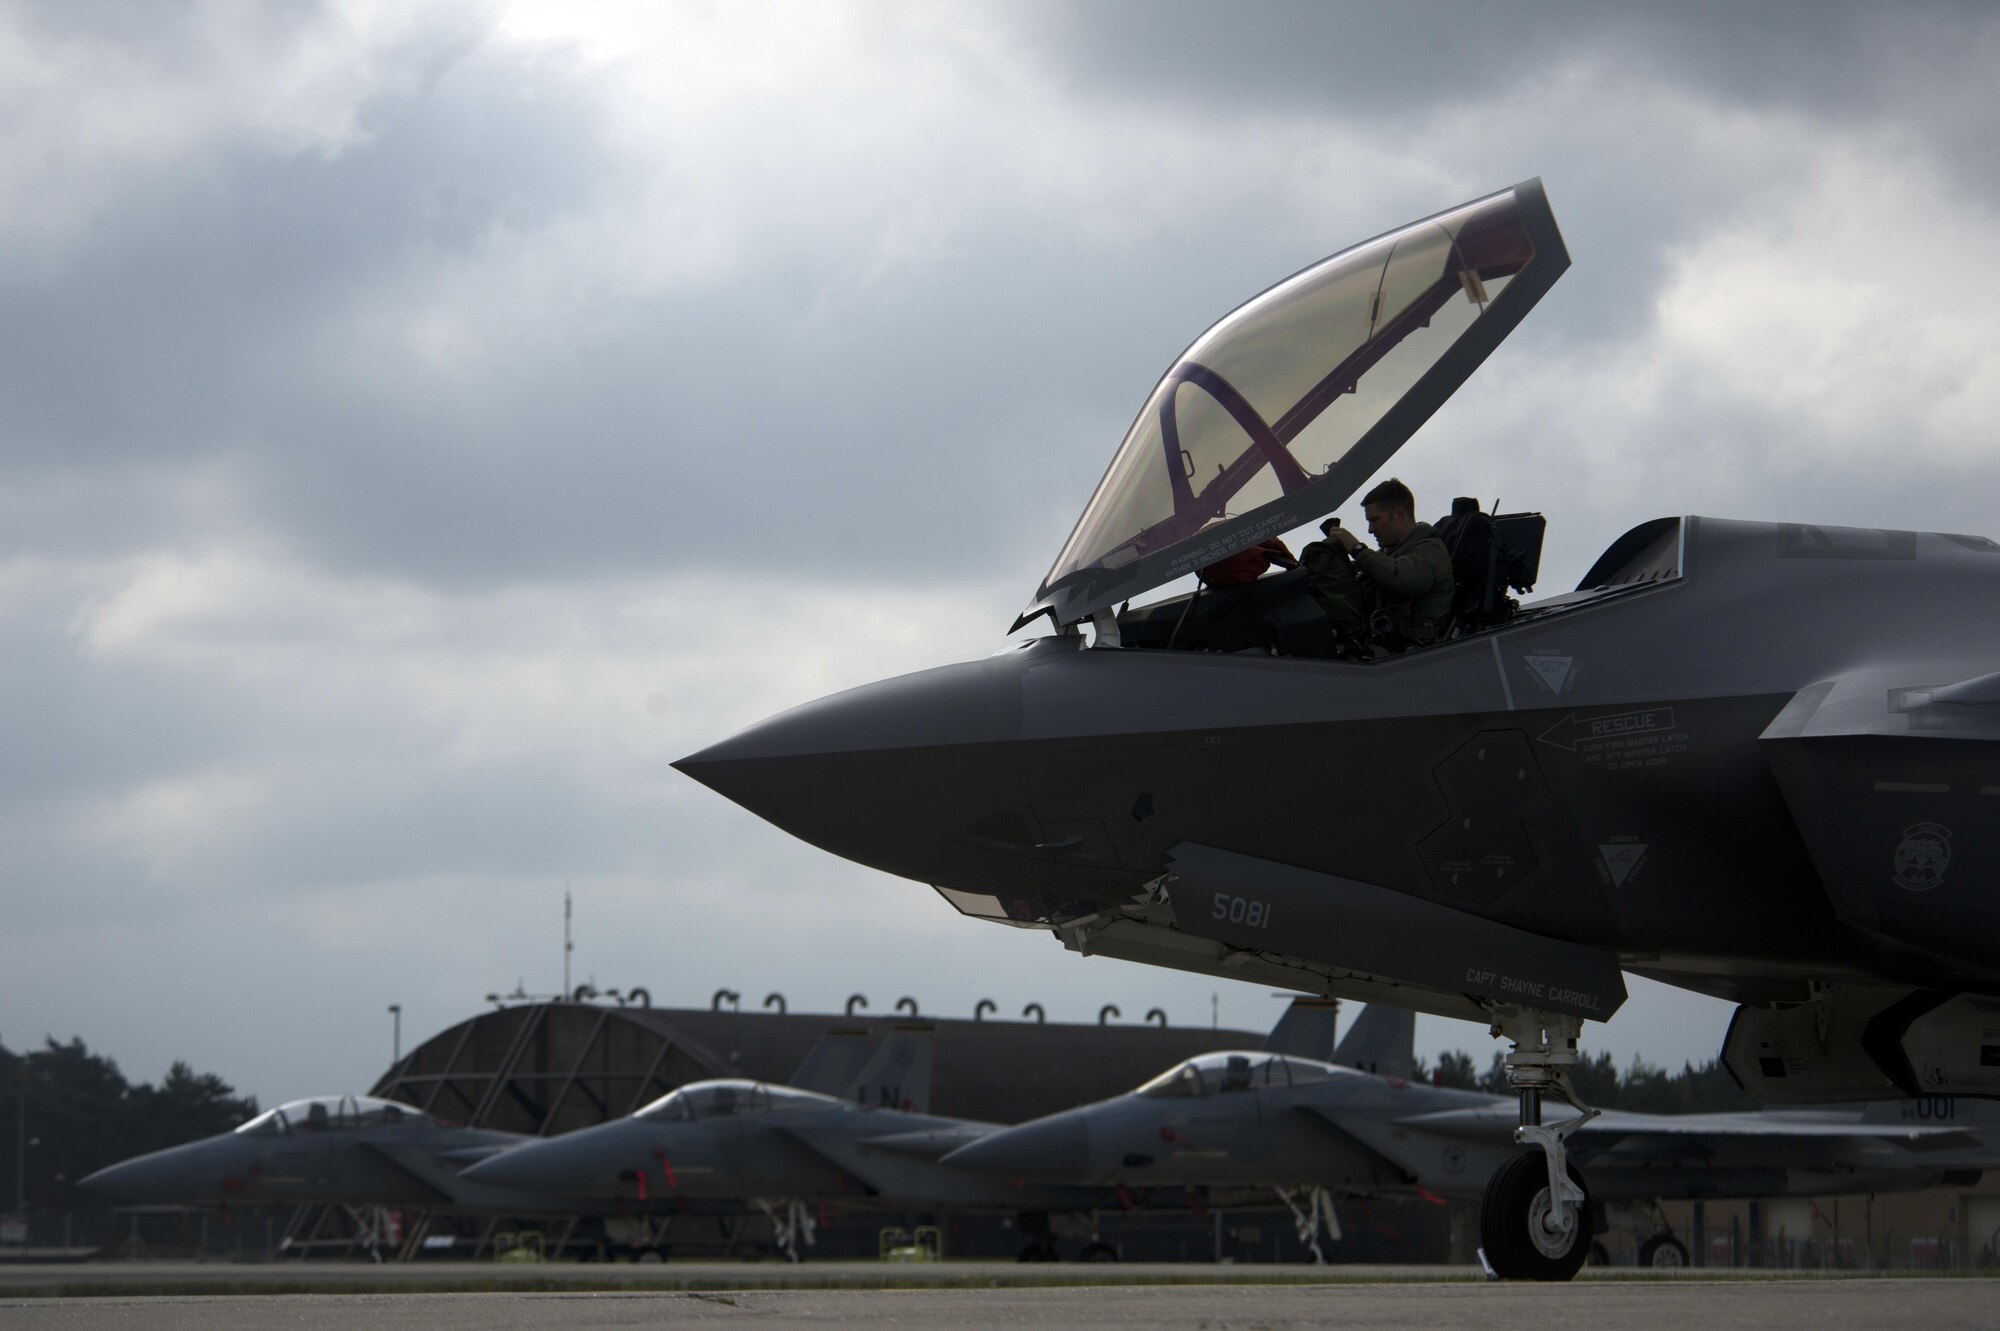 An F-35A Lightning II pilot from the 34th Fighter Squadron, assigned to Hill Air Force Base, Utah, completes pre-flight checks prior to departing Royal Air Force Lakenheath, England, May 7. Eight F-35A aircraft from the squadron, along with supporting units and equipment from Hill AFB, completed the first F-35A training deployment to Europe May 7. (U.S. Air Force photo/Master Sgt. Eric Burks)